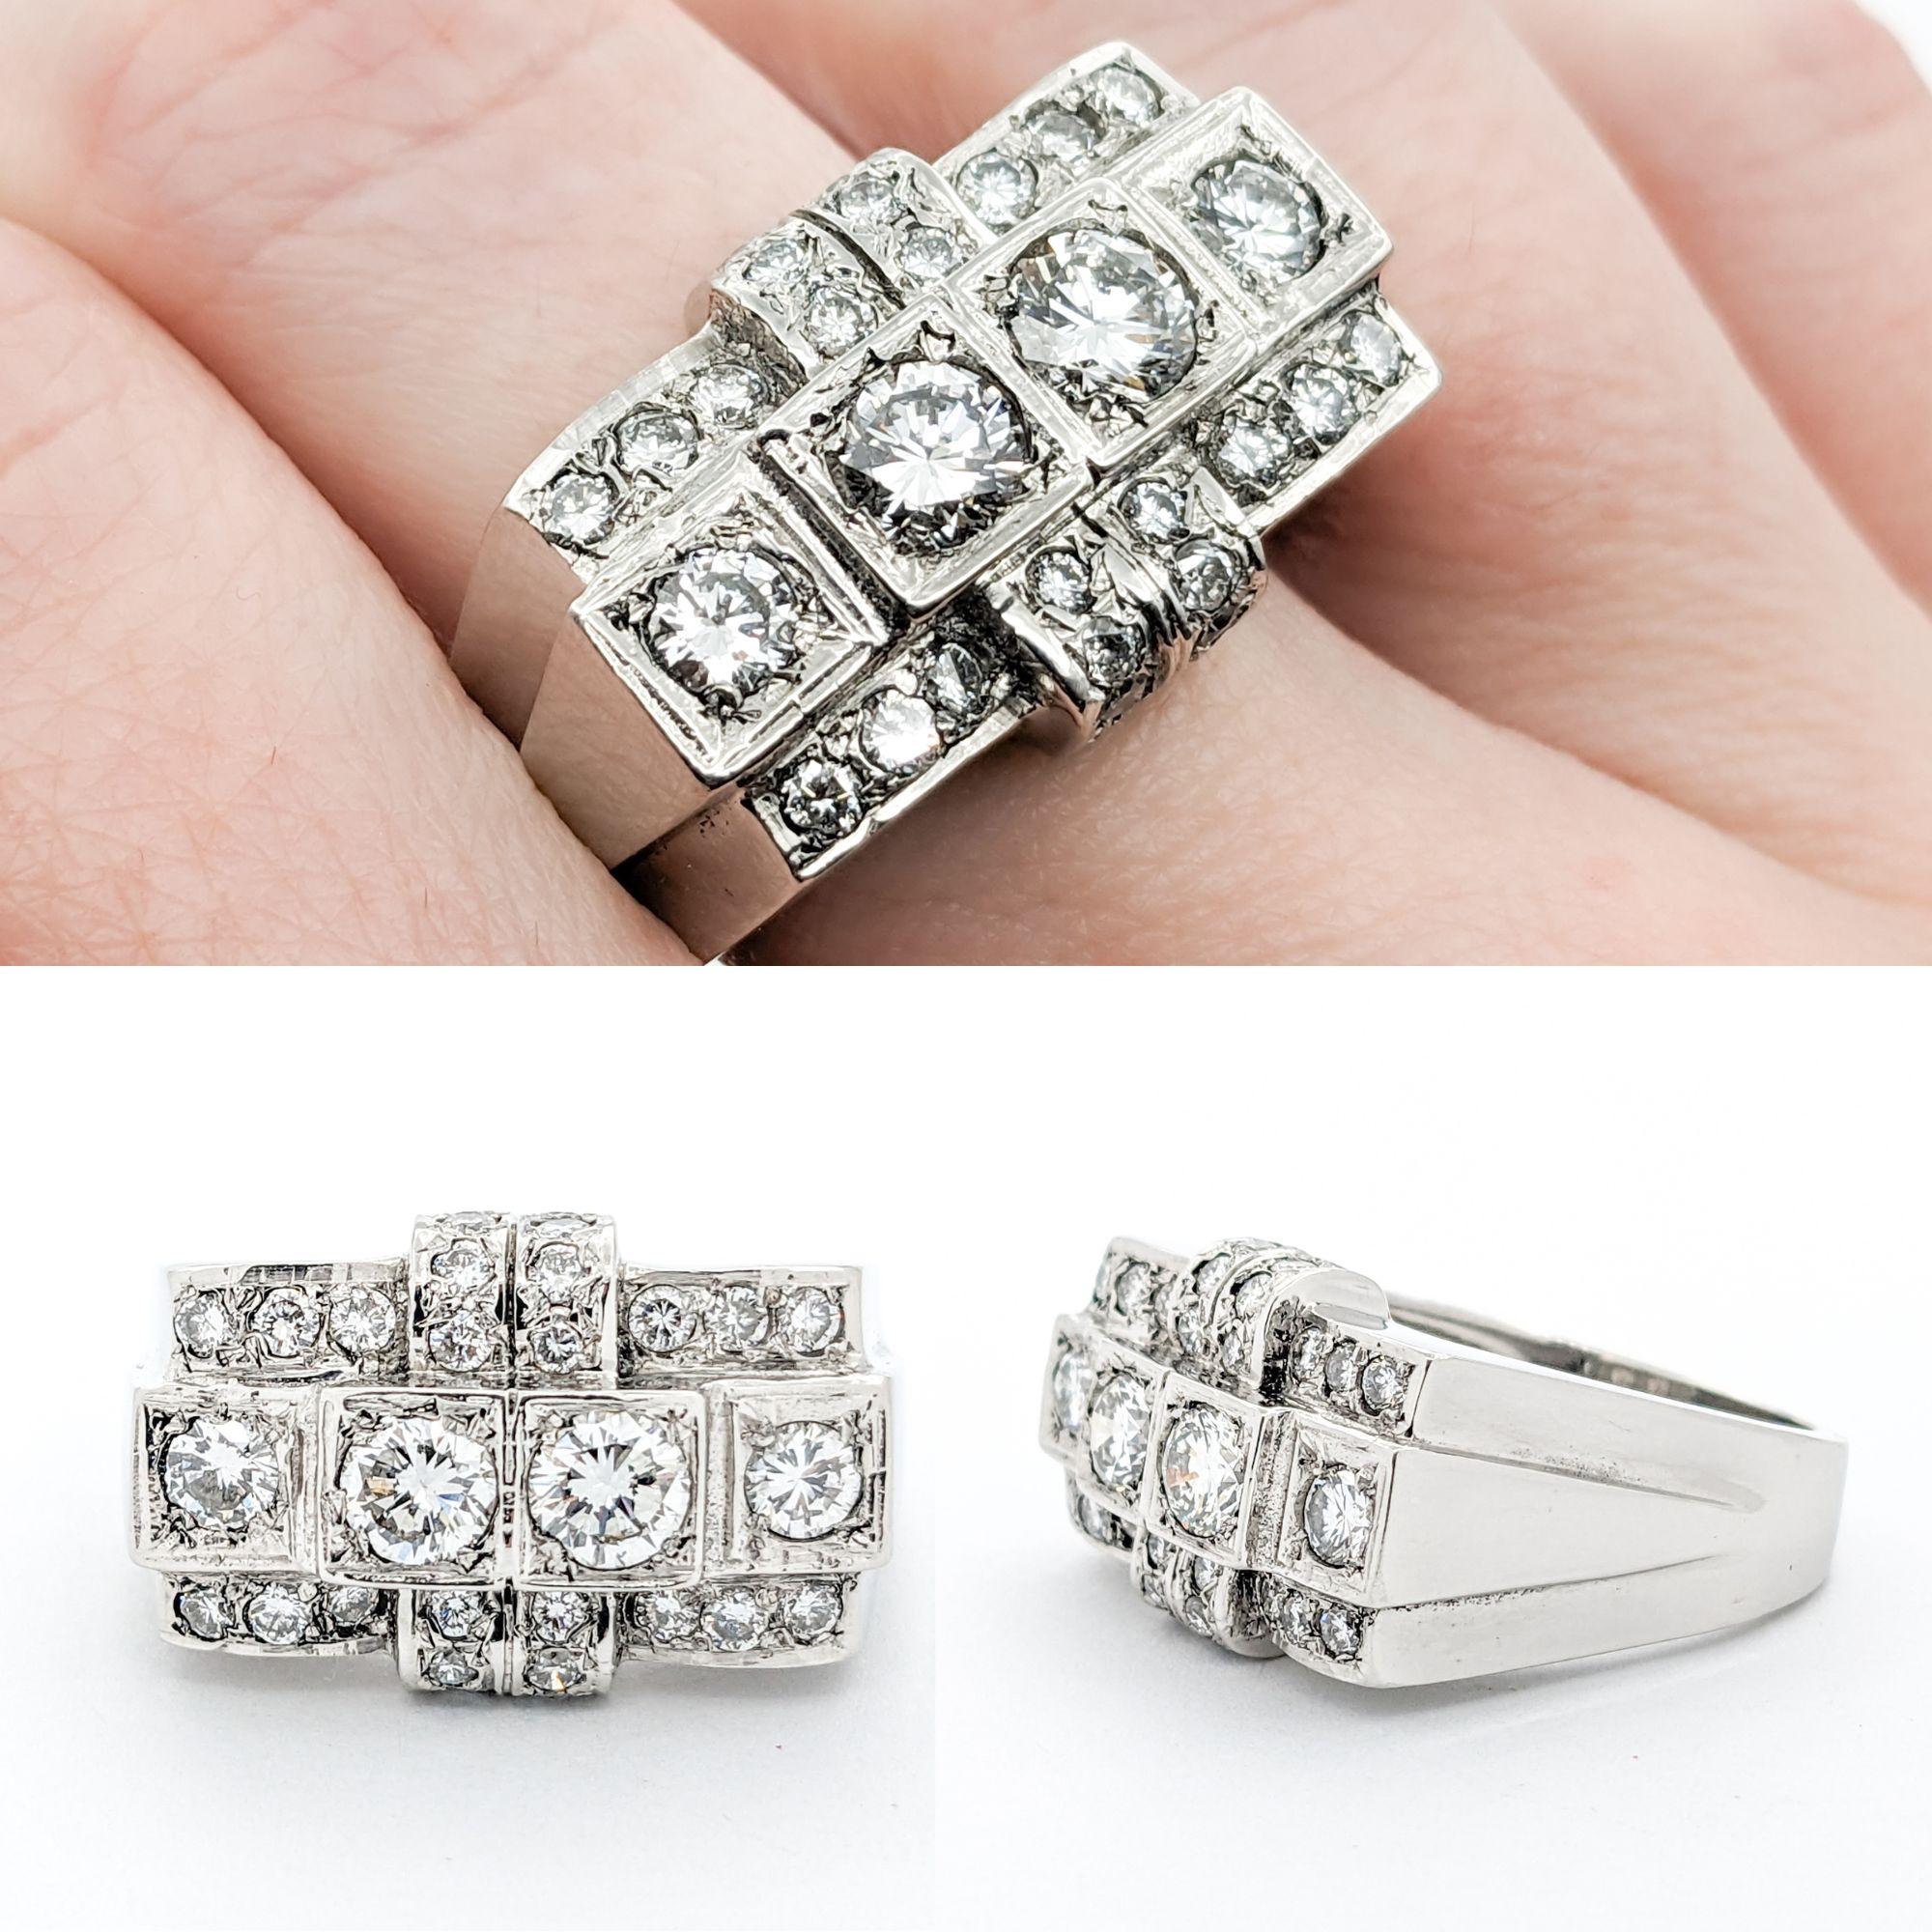 Vintage 3ctw Diamond Ring In Platinum

Introducing an elegant and timeless Vintage Ring, meticulously crafted in Platinum. This exceptional piece showcases a magnificent centerpiece featuring 3.00ctw of round diamonds. Each diamond has been